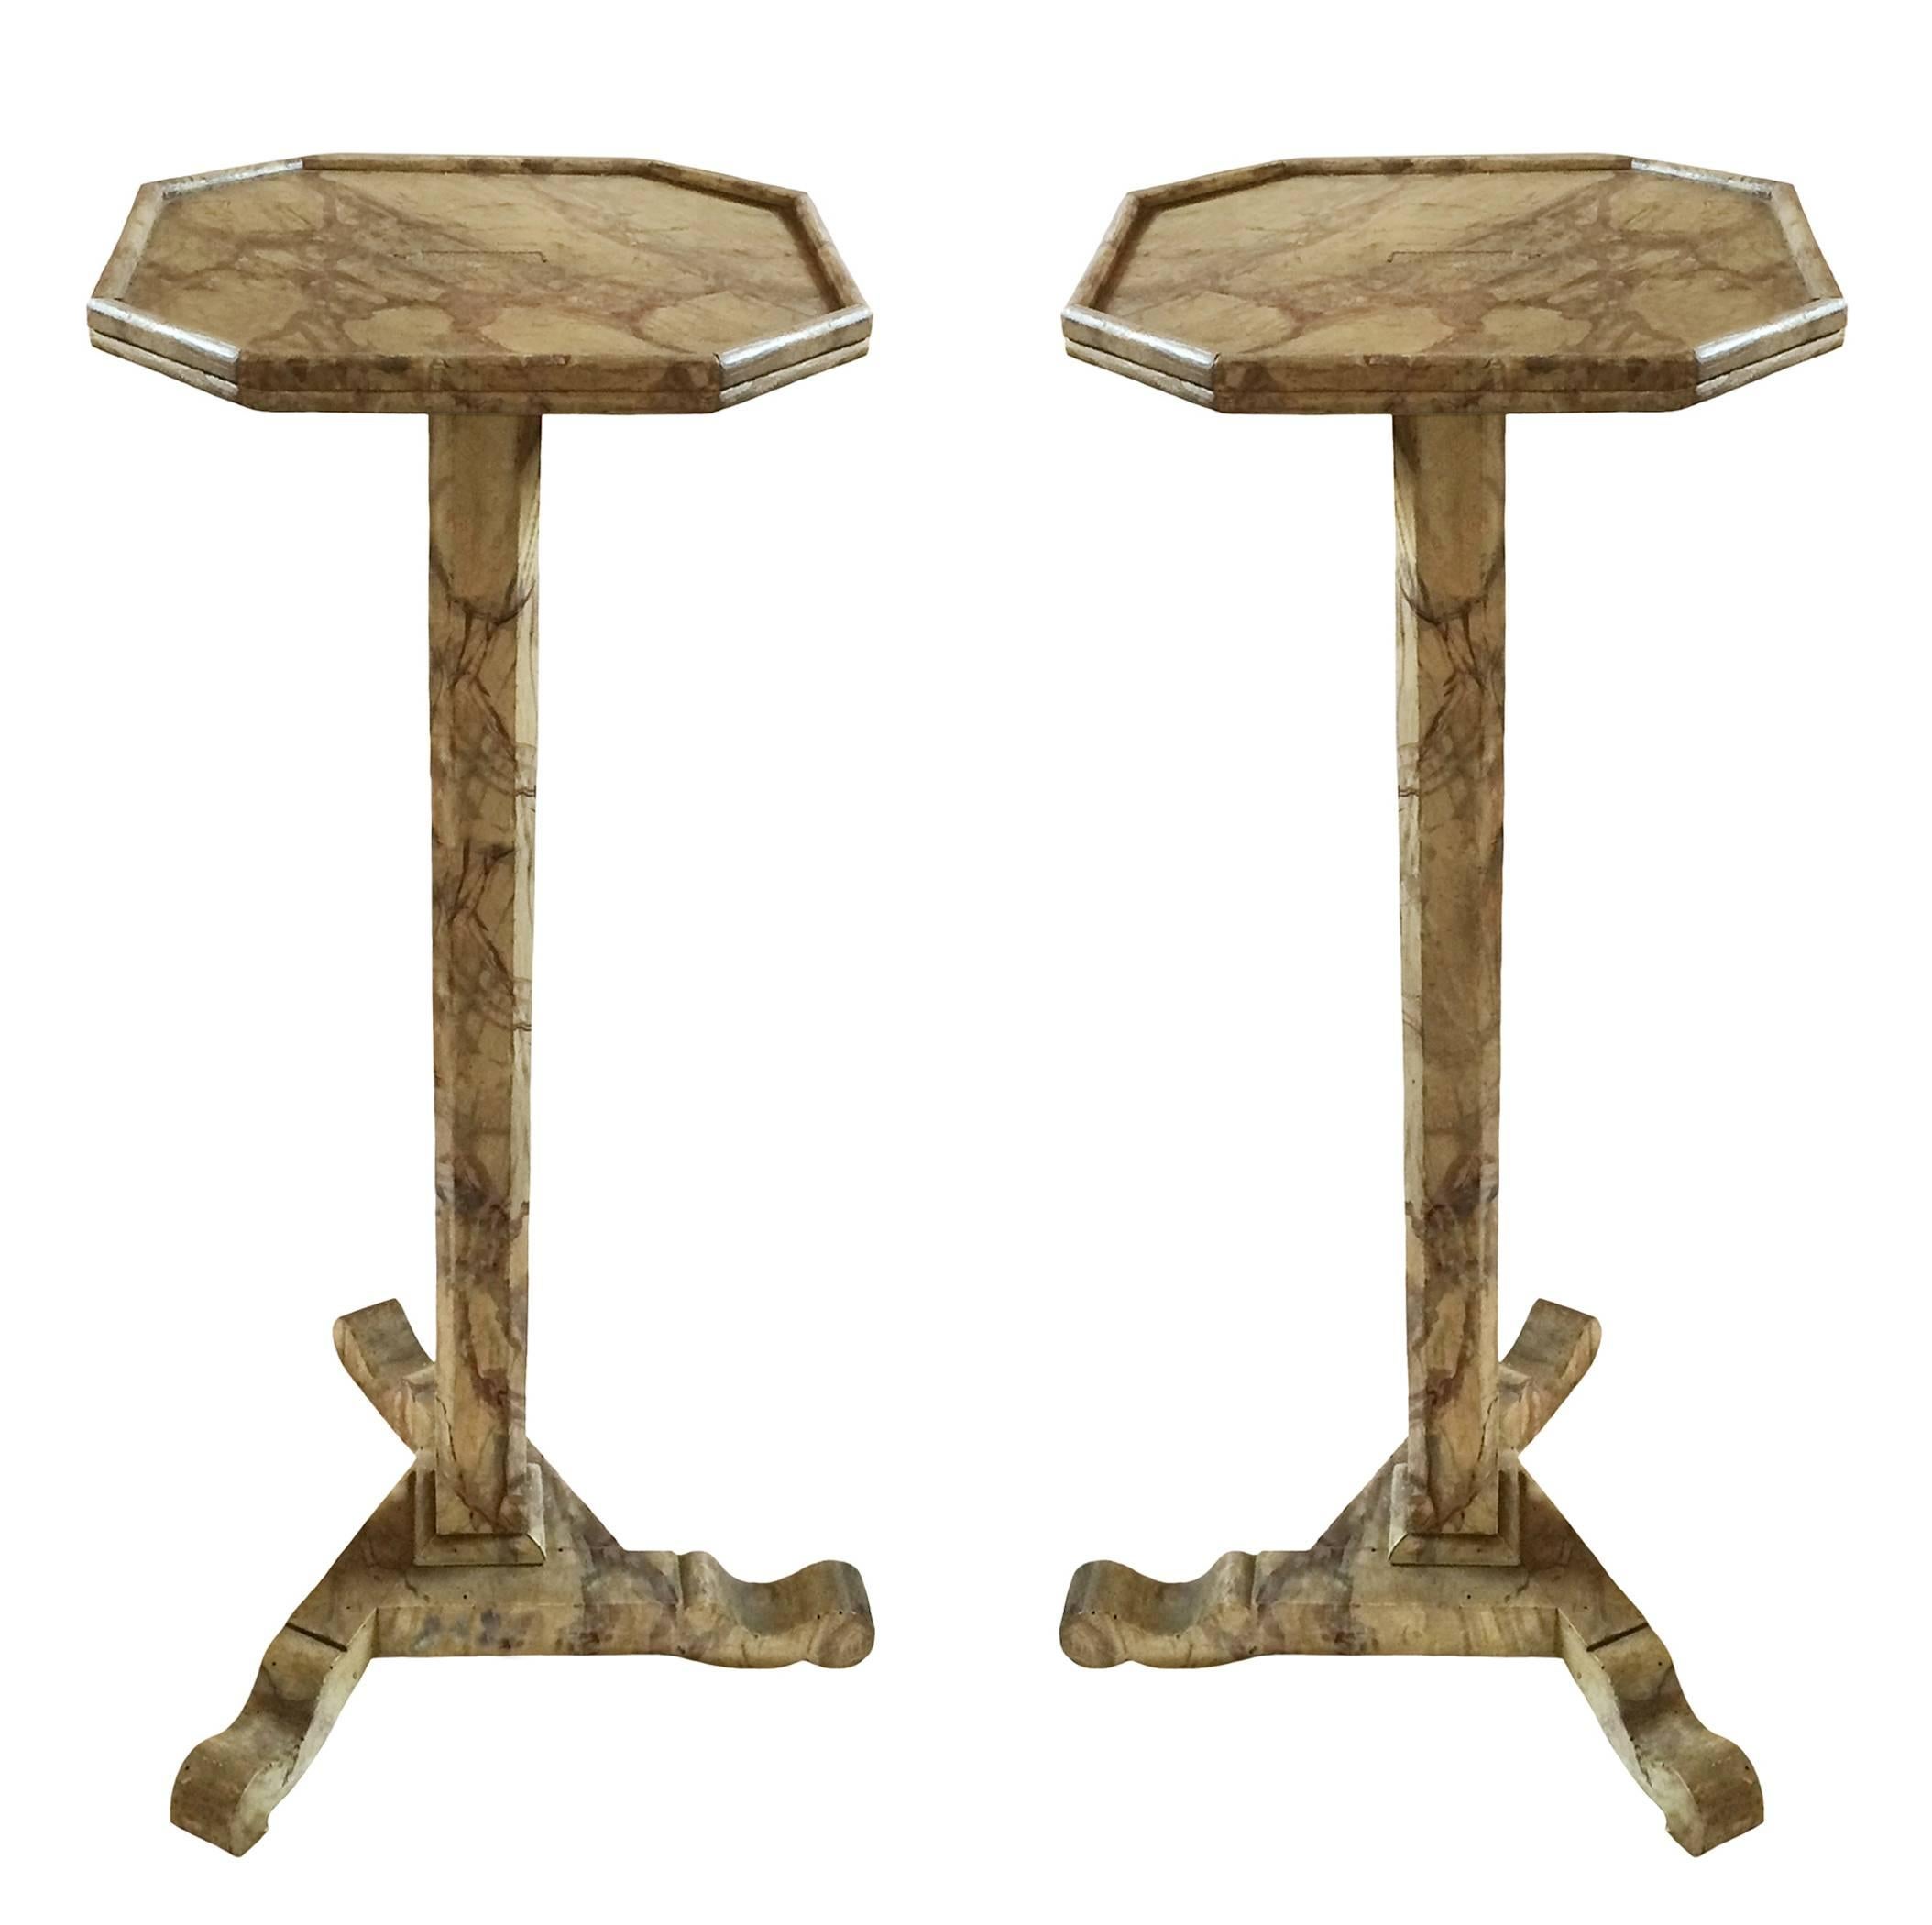 Pair of Italian marbleized octagonal wood pedestal stands; shaped tripartite base, 19th century. Sold as a pair.